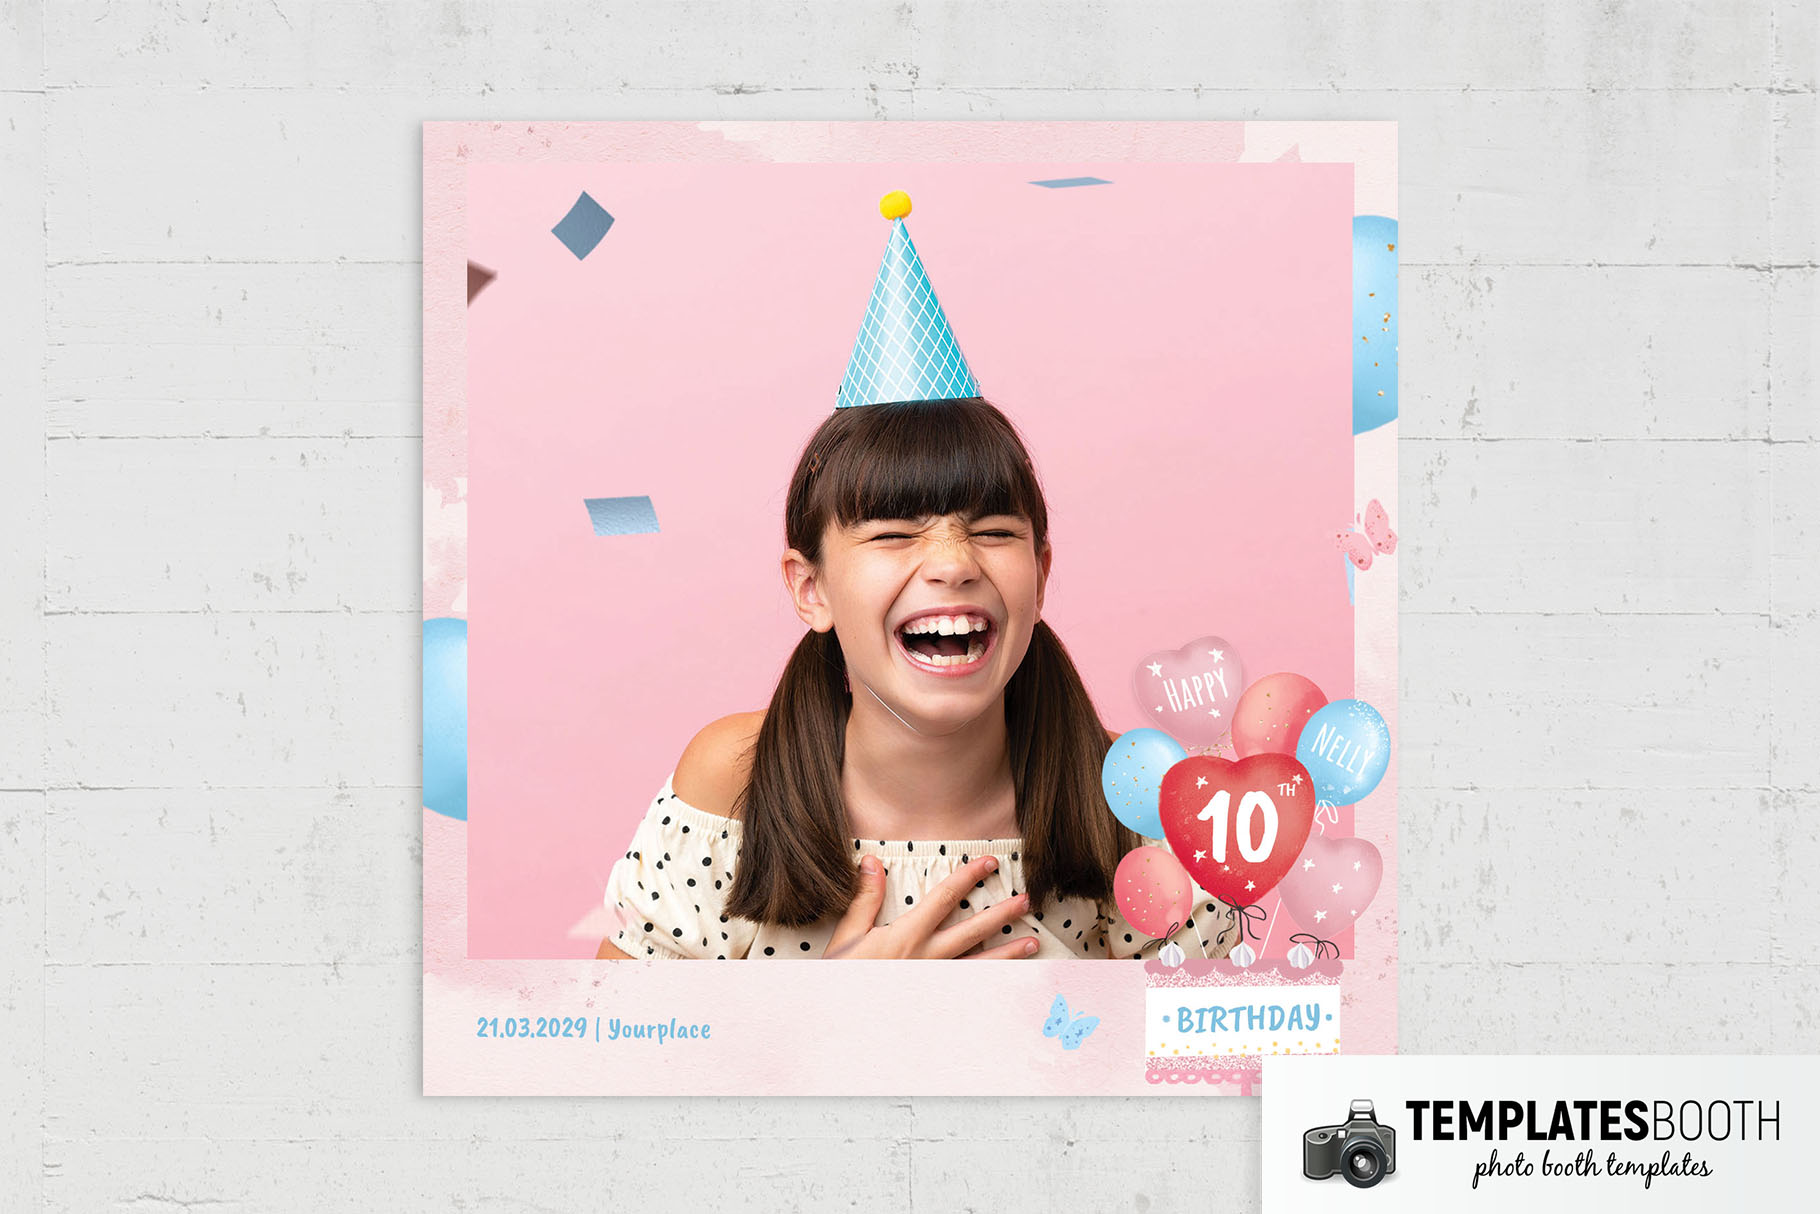 Girl's Birthday Photo Booth Template